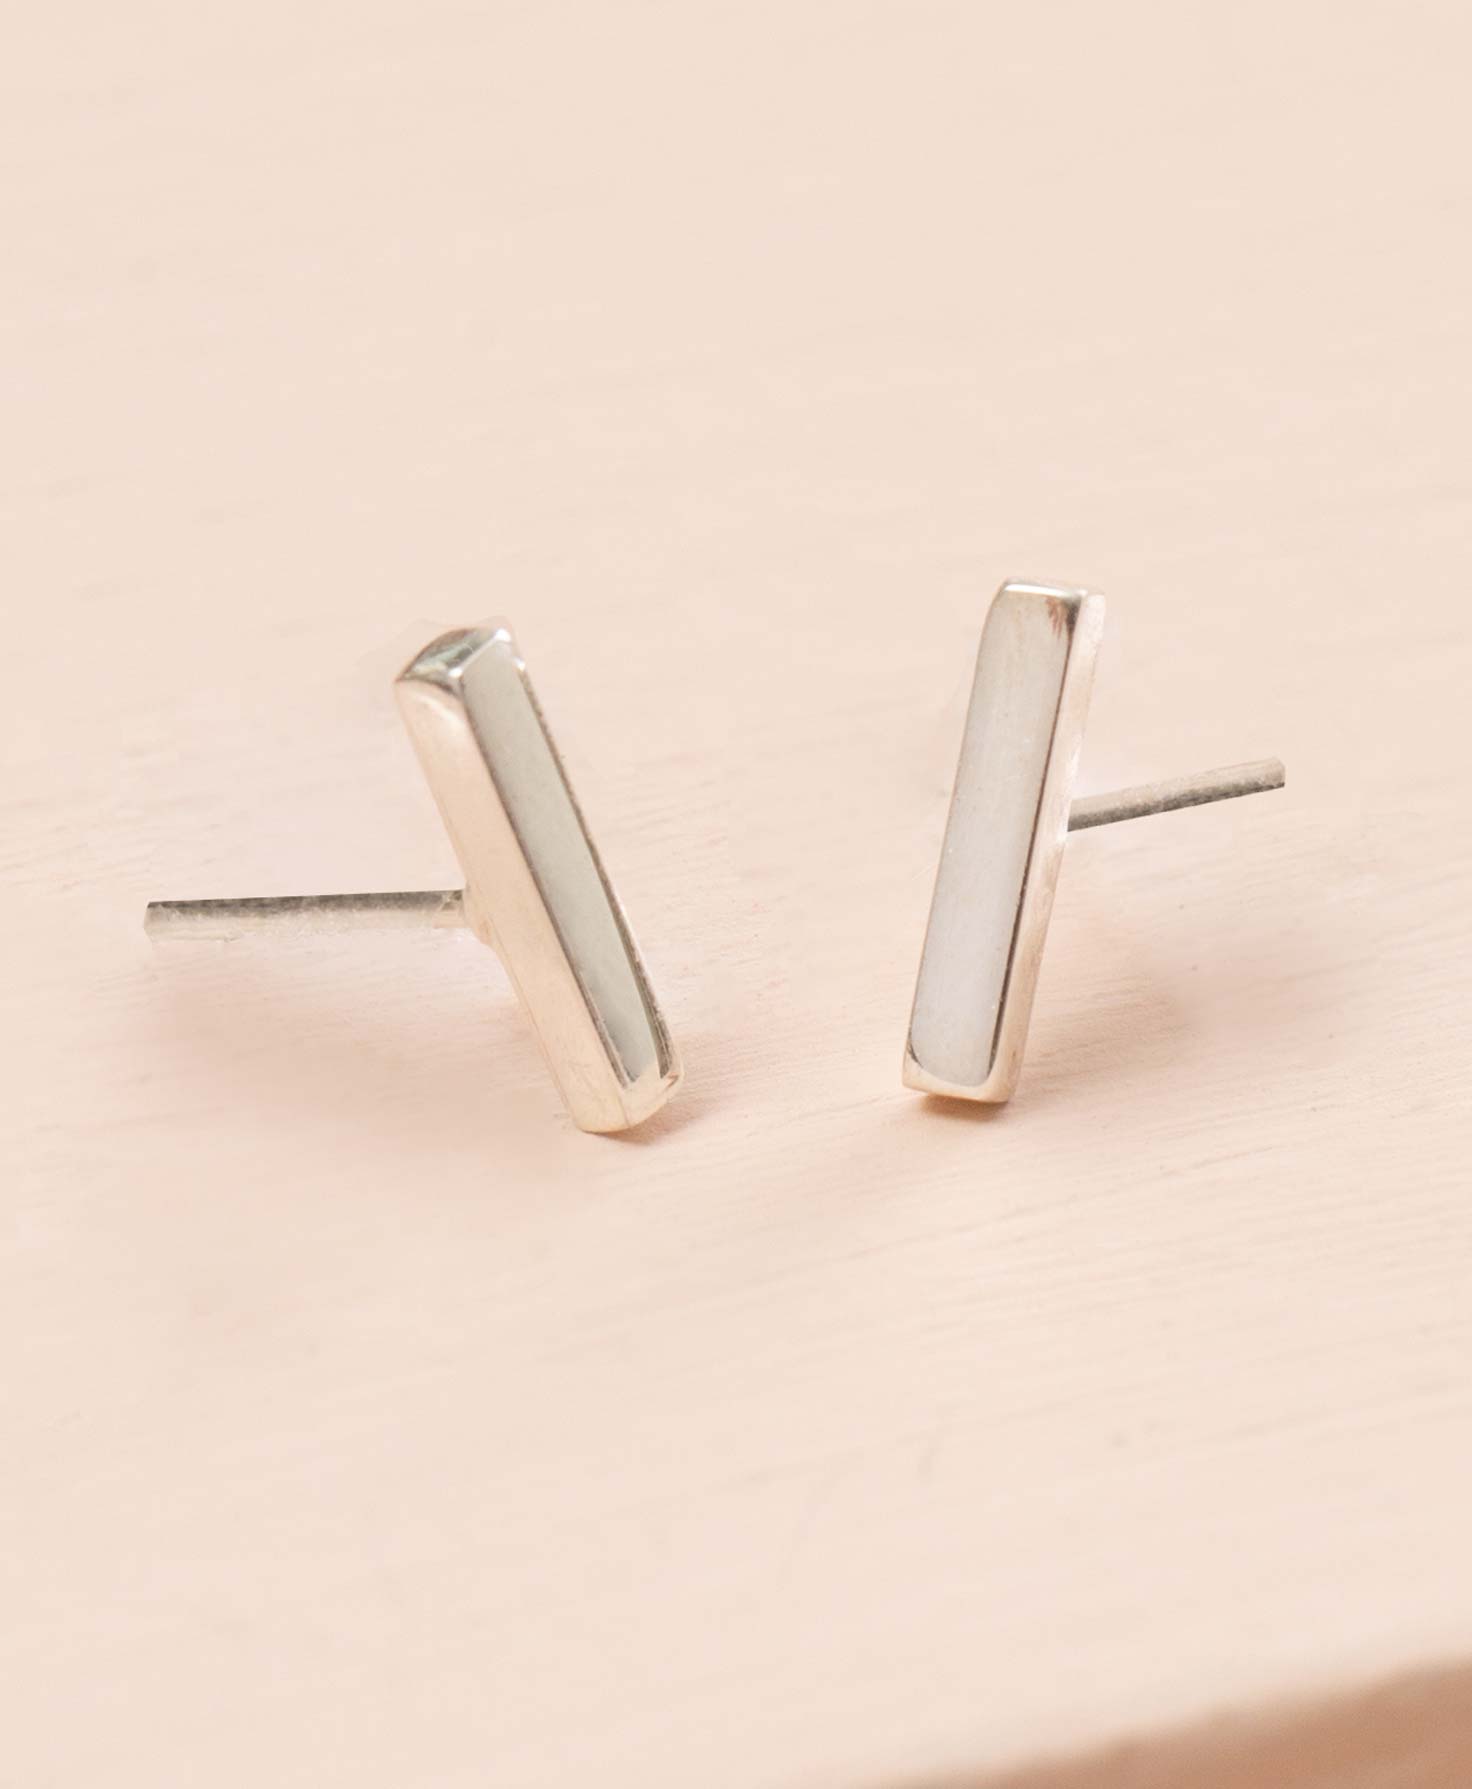 The Silver Bar Studs sit on a cream colored background. They are small, minimalistic studs made of silver plated brass. The silver posts are connected to a rectangular, 3-dimensional silver bar. The dainty bar has a shiny metallic finish.